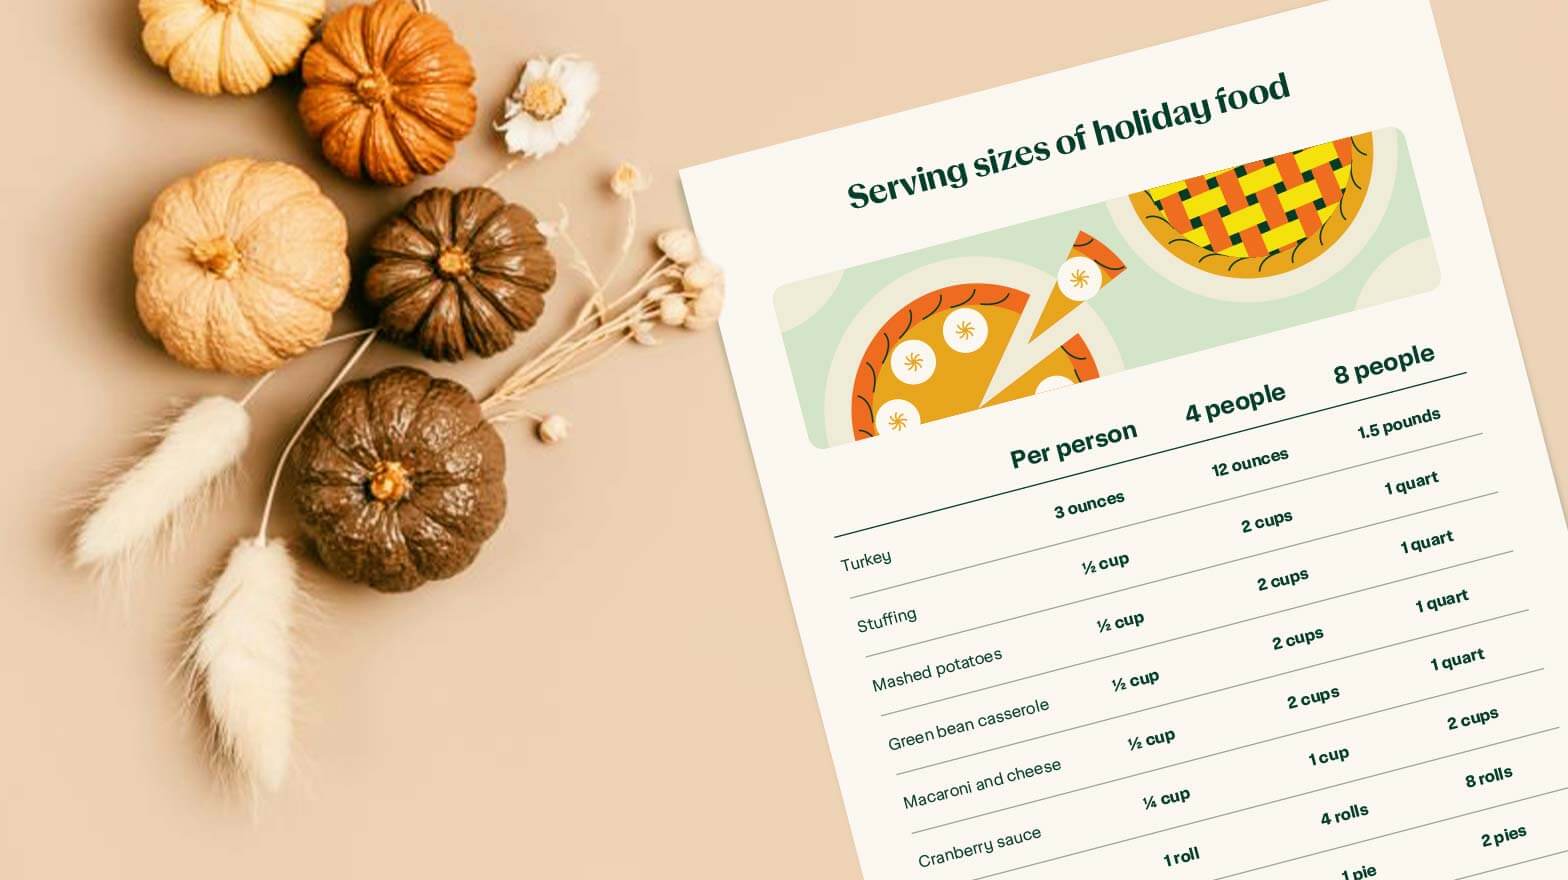 serving size of holiday food printable